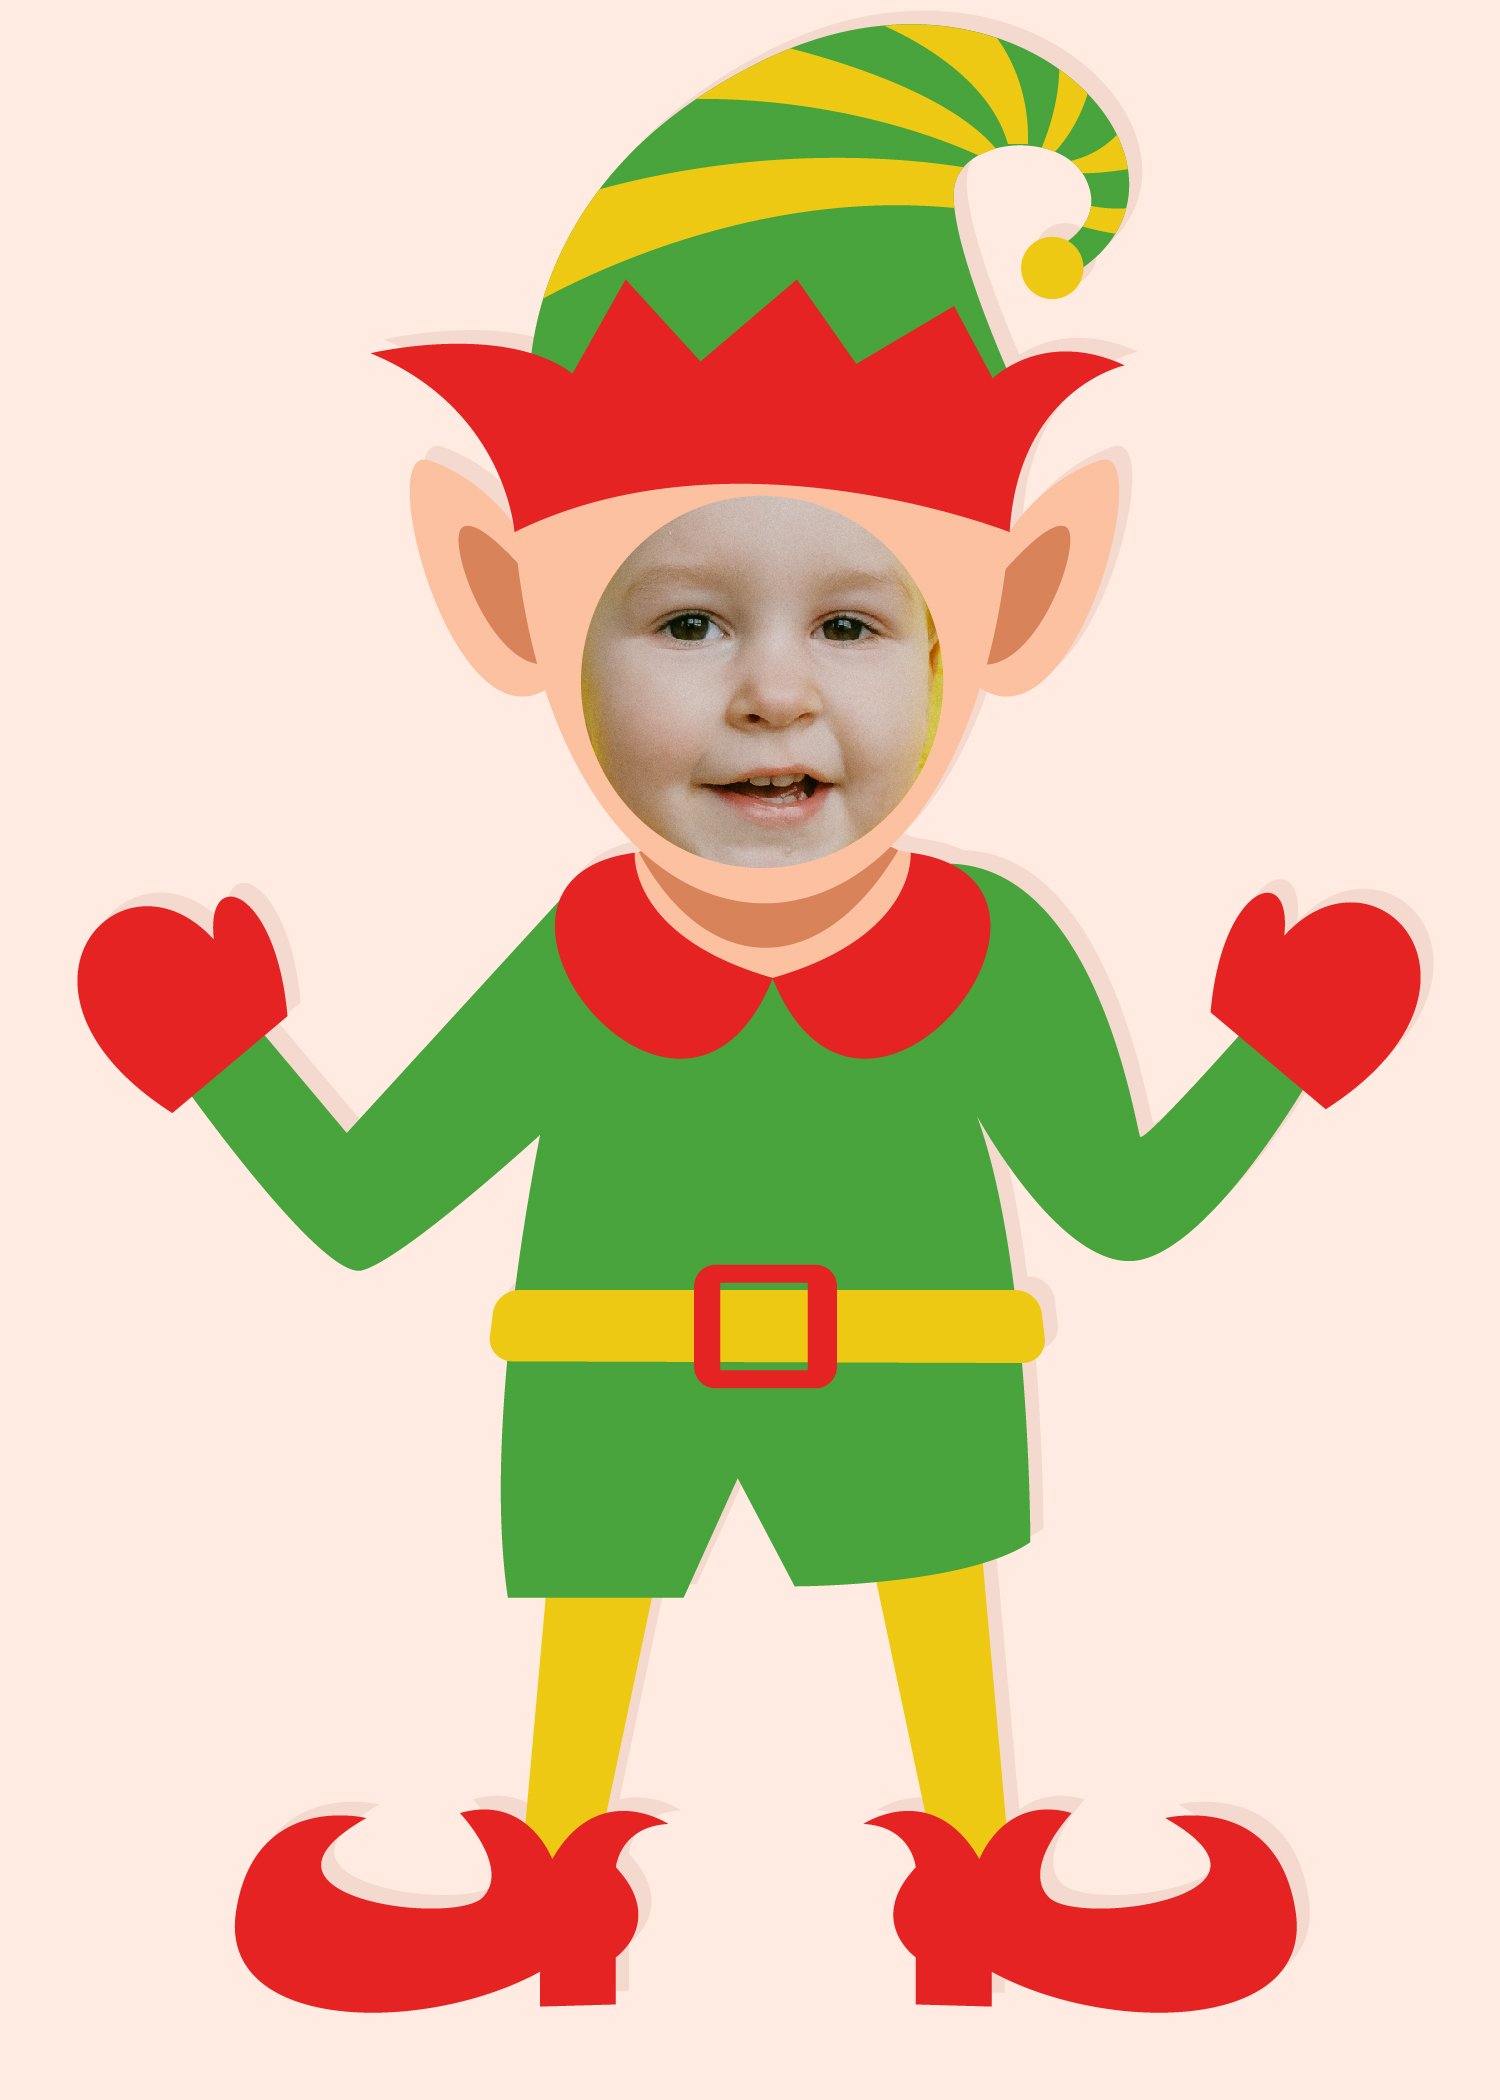 Christmas Elf Template For Photo in JPG PNG PSD SVG Download